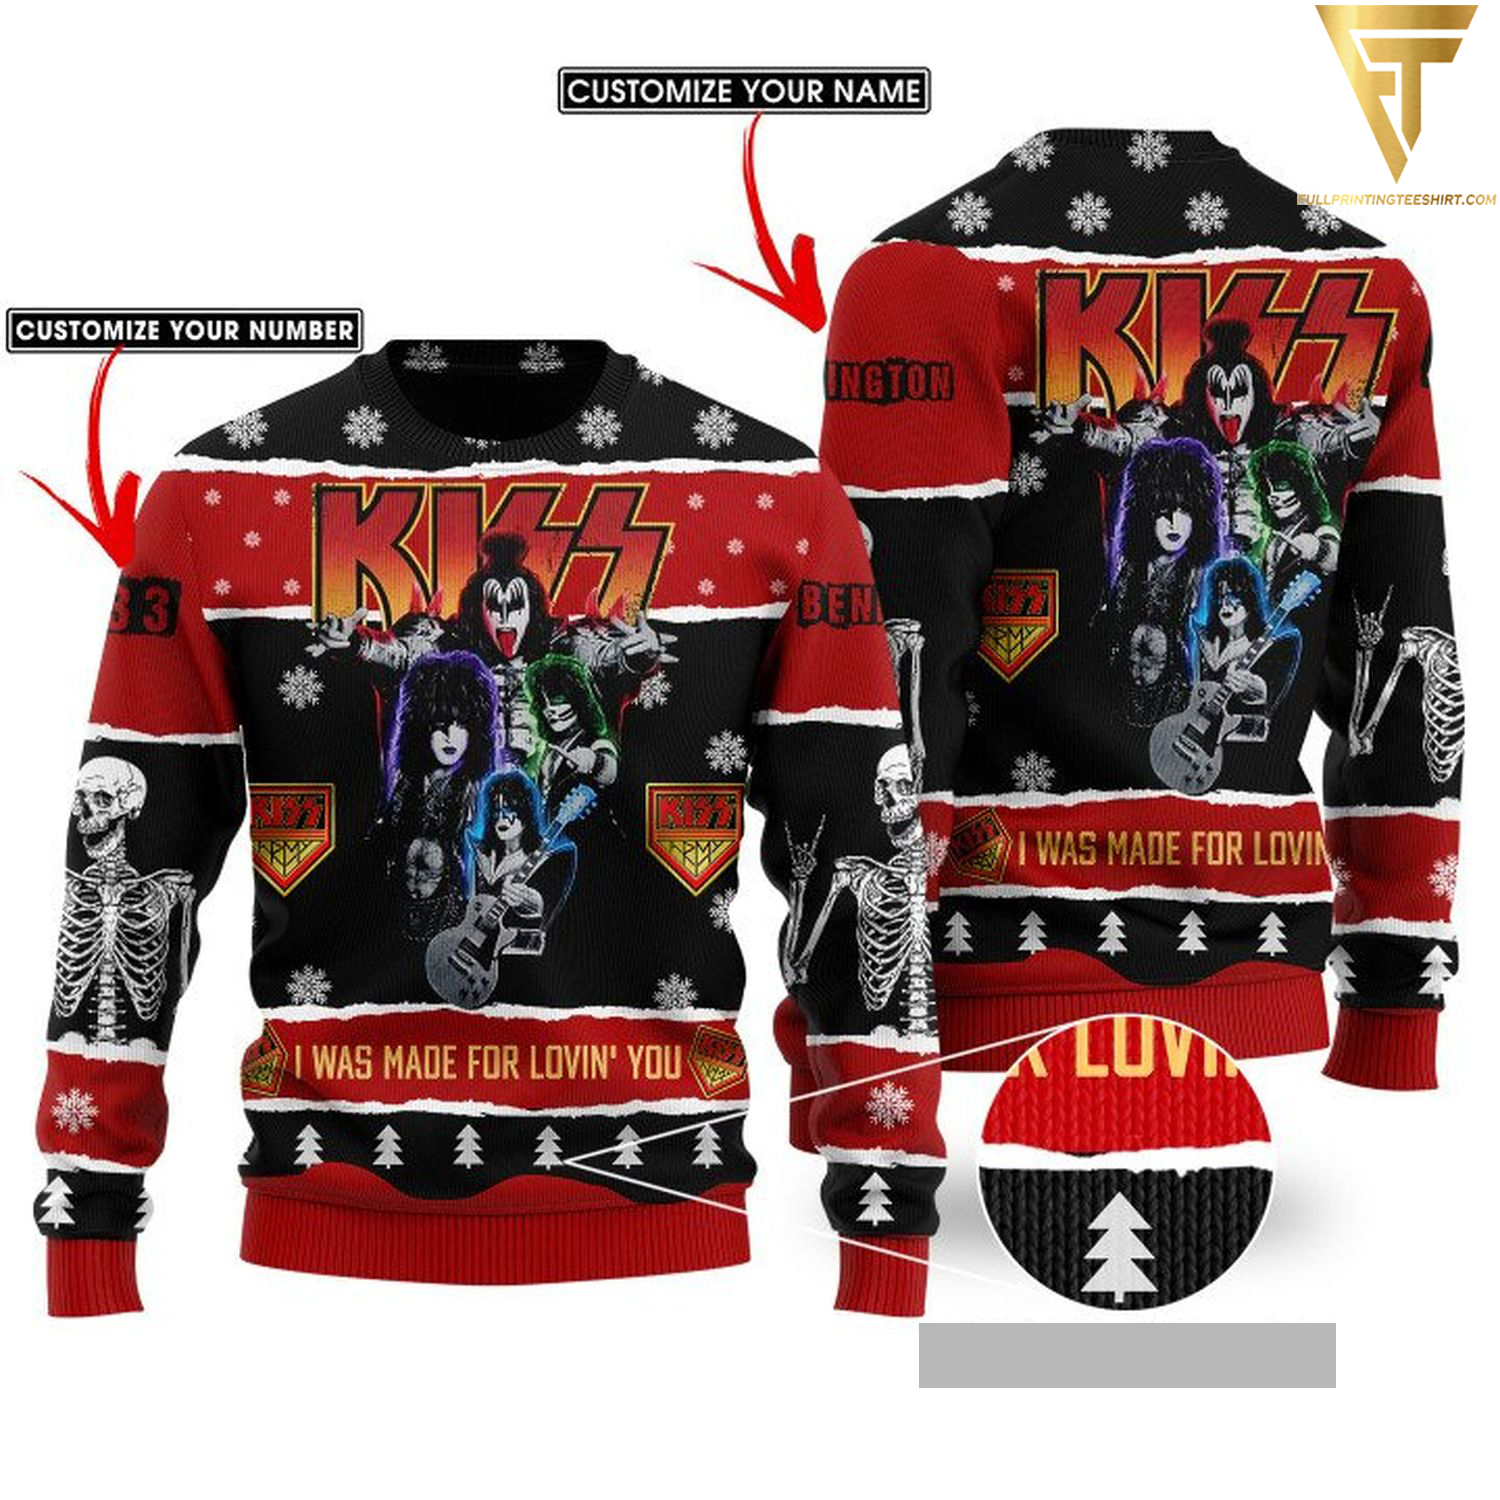 Custom kiss rock band i was made for loving you ugly christmas sweater - Copy (2)